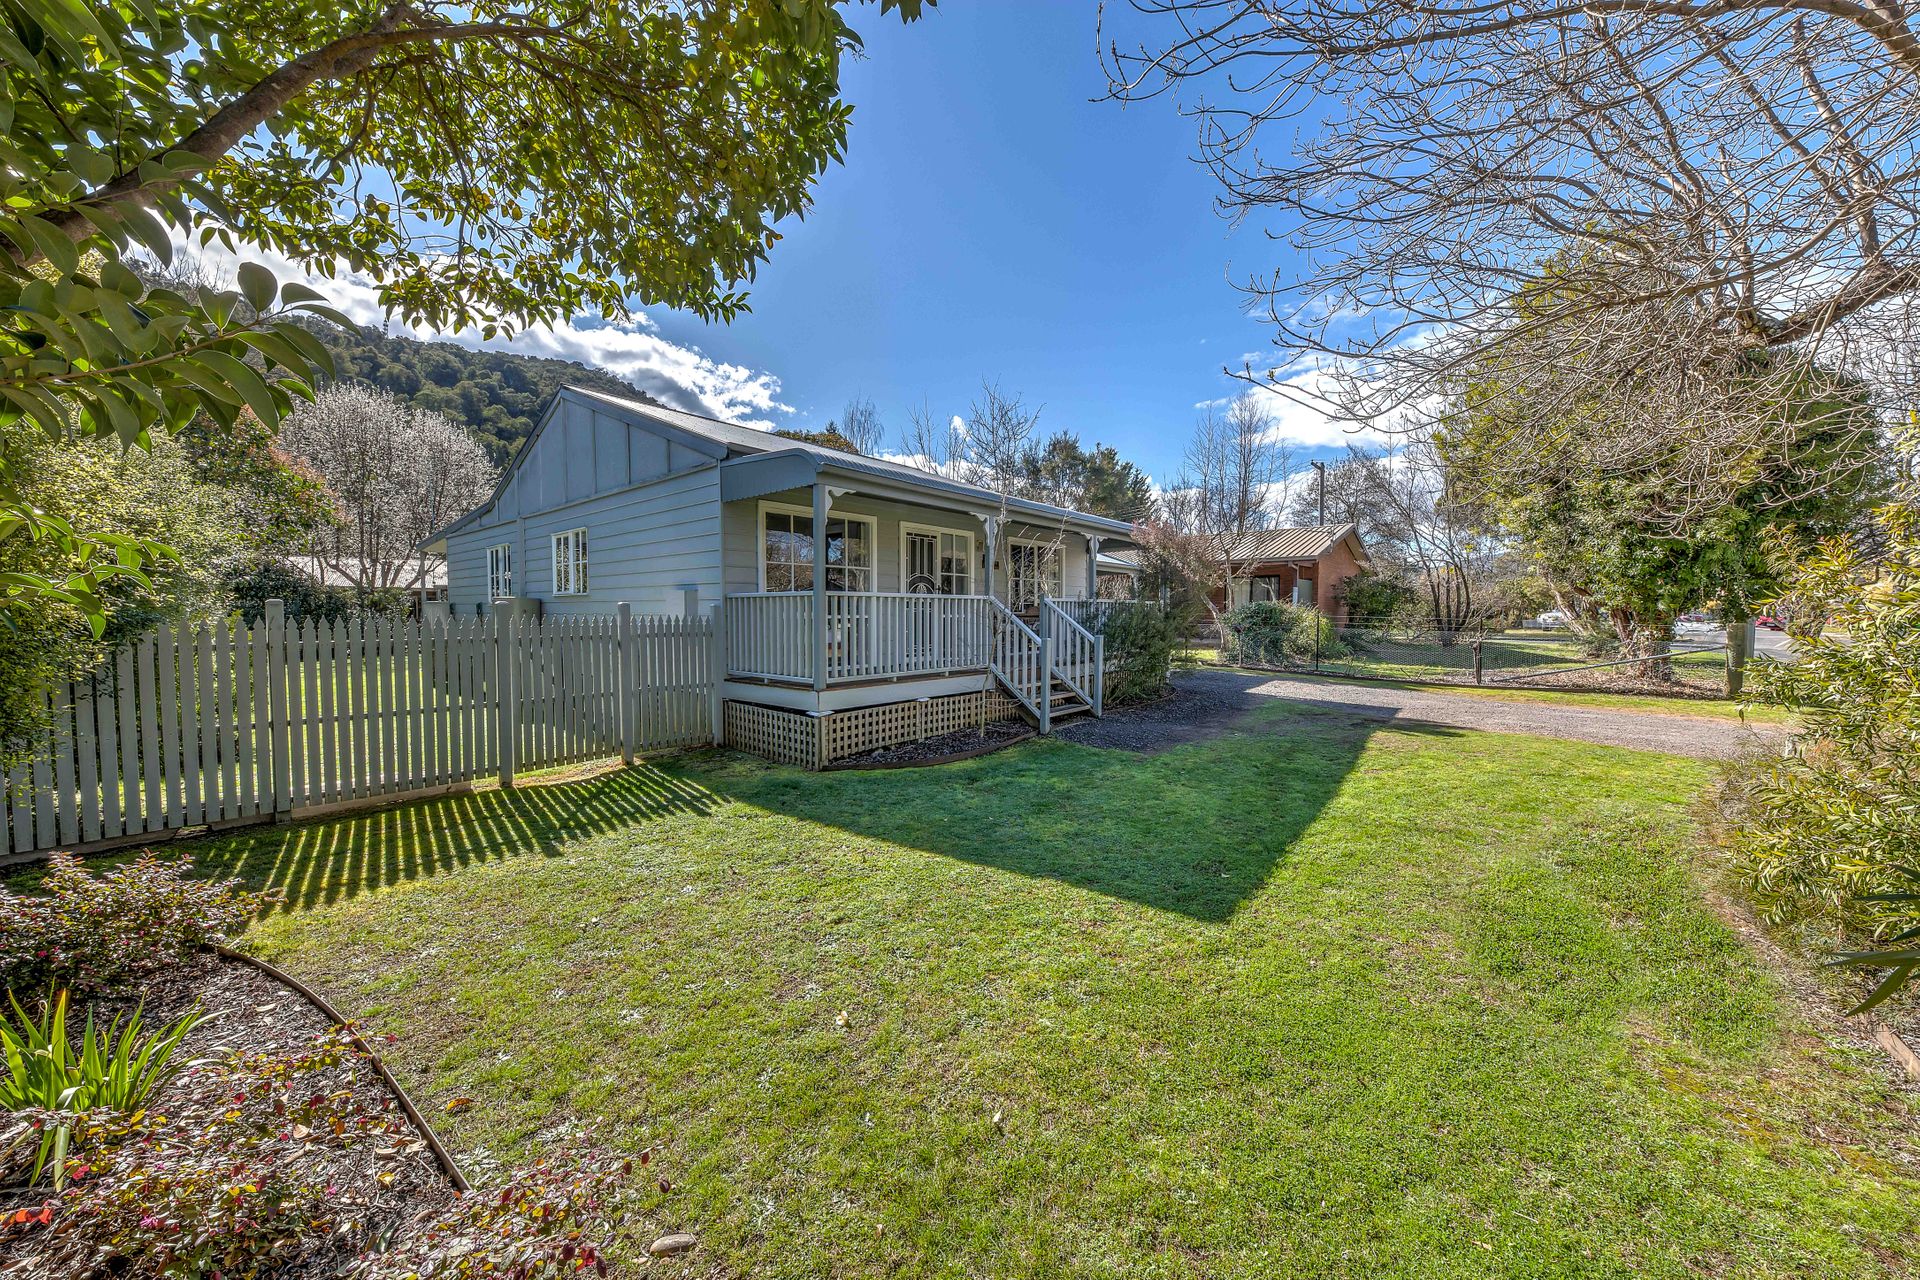 Corinda Cottage – 4 bedroom pet friendly five minute walk to town and Ovens River.